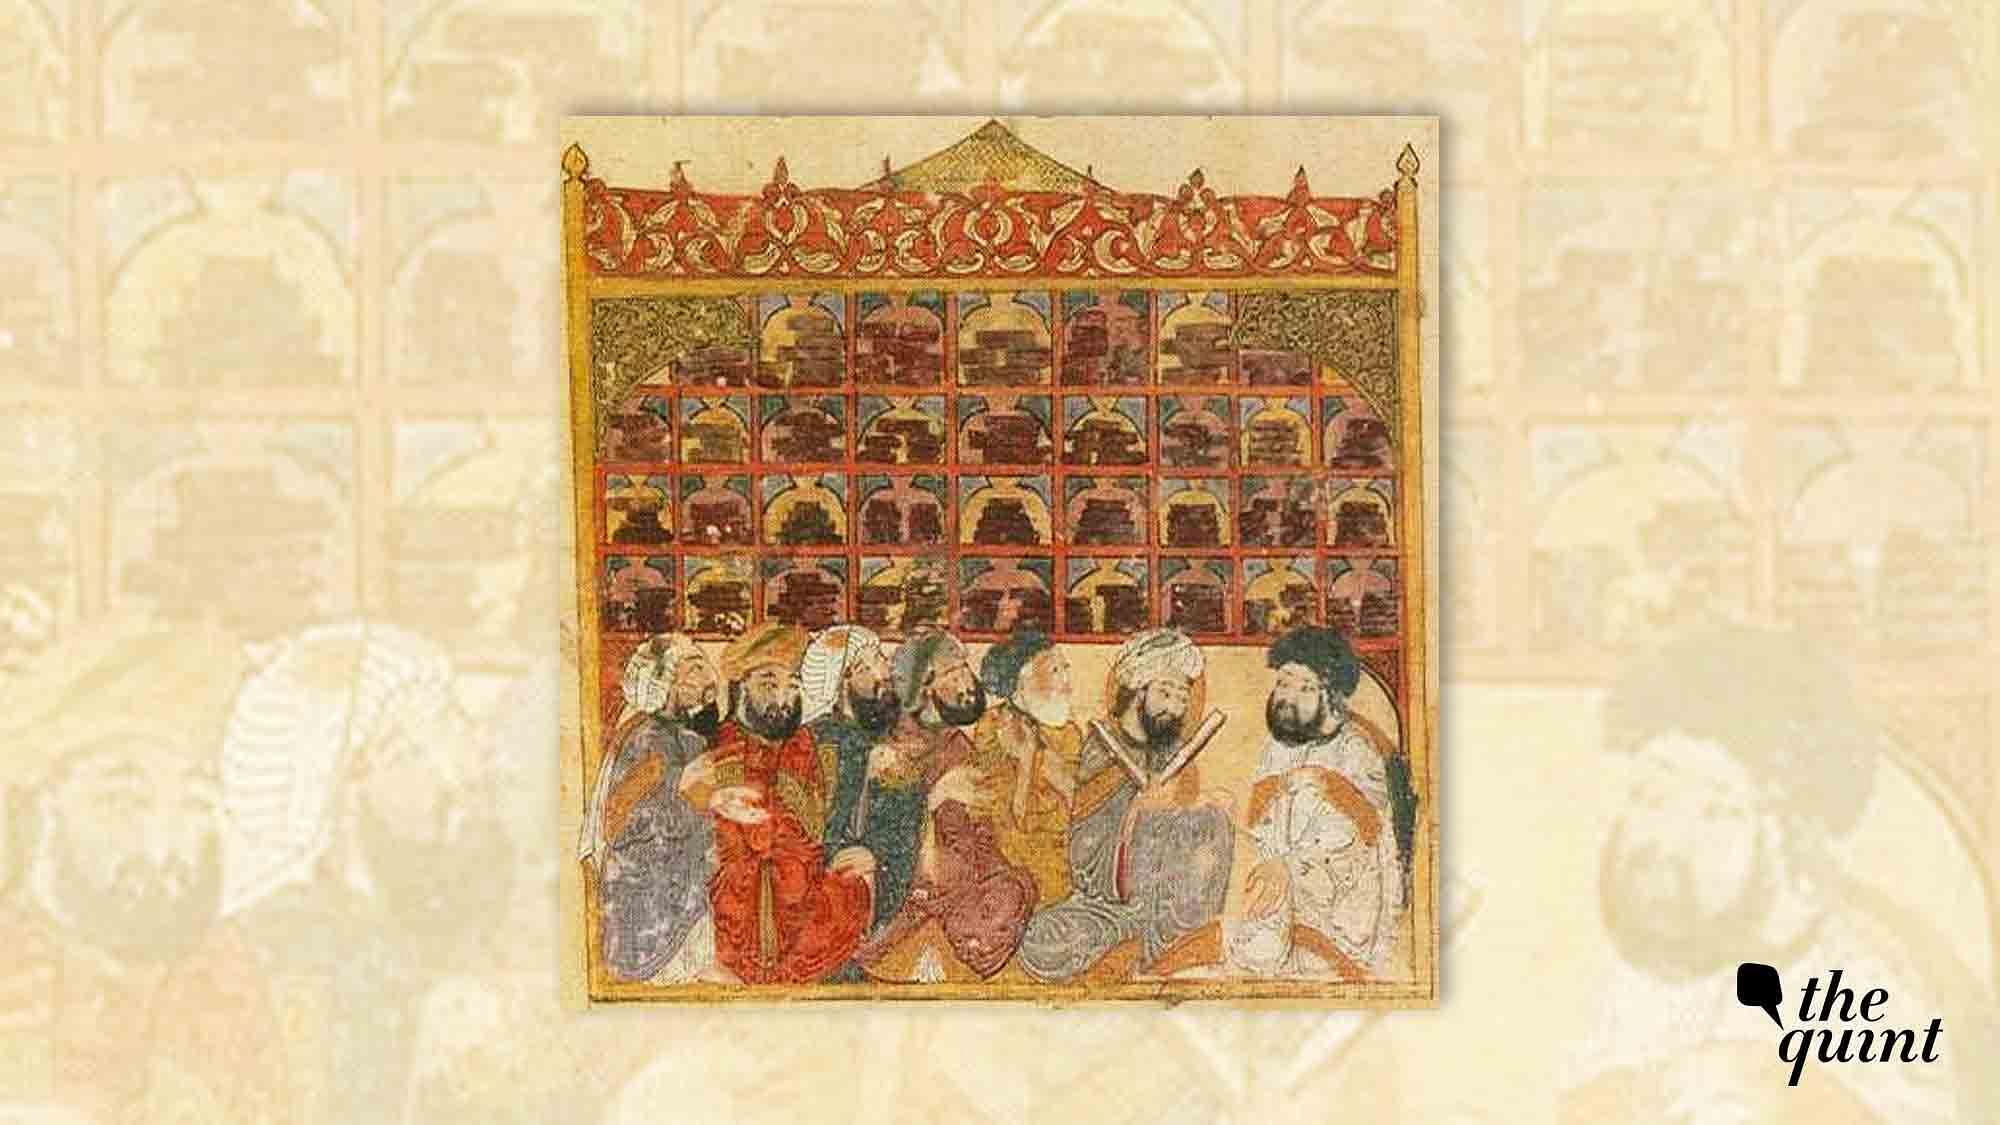 Scholars at an Abbasid library, from the Maqamat of al-Hariri by Yahya ibn Mahmud al-Wasiti, Baghdad, 1237 CE. Picture used for representation of Islamic Golden Age.